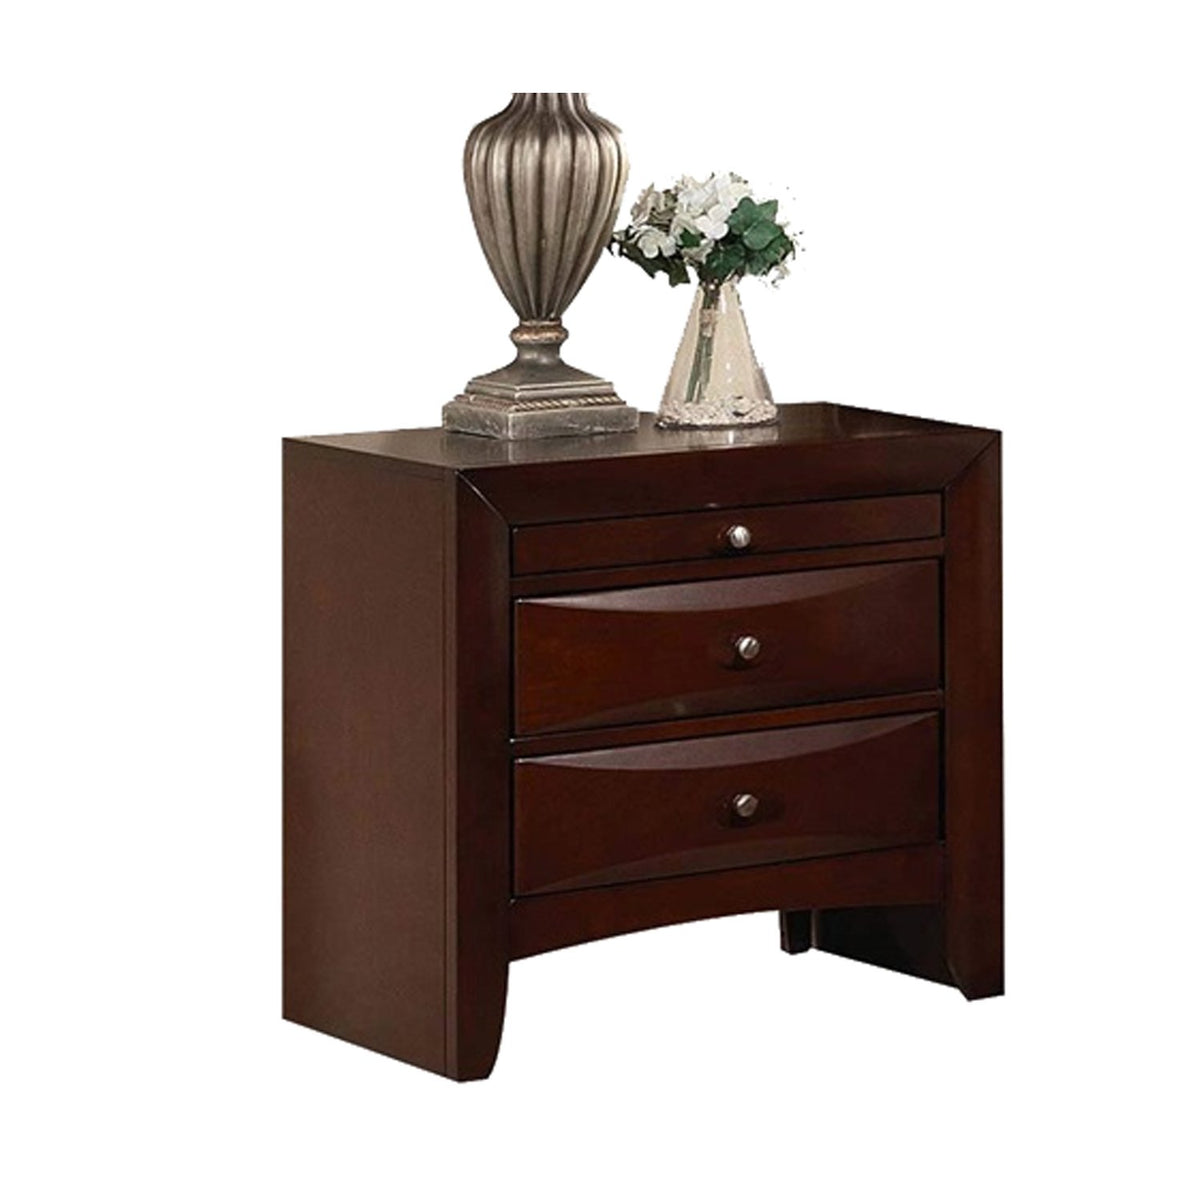 2 Drawer Wooden Nightstand with 1 Pull Out Tray, Cherry Brown - BM194244